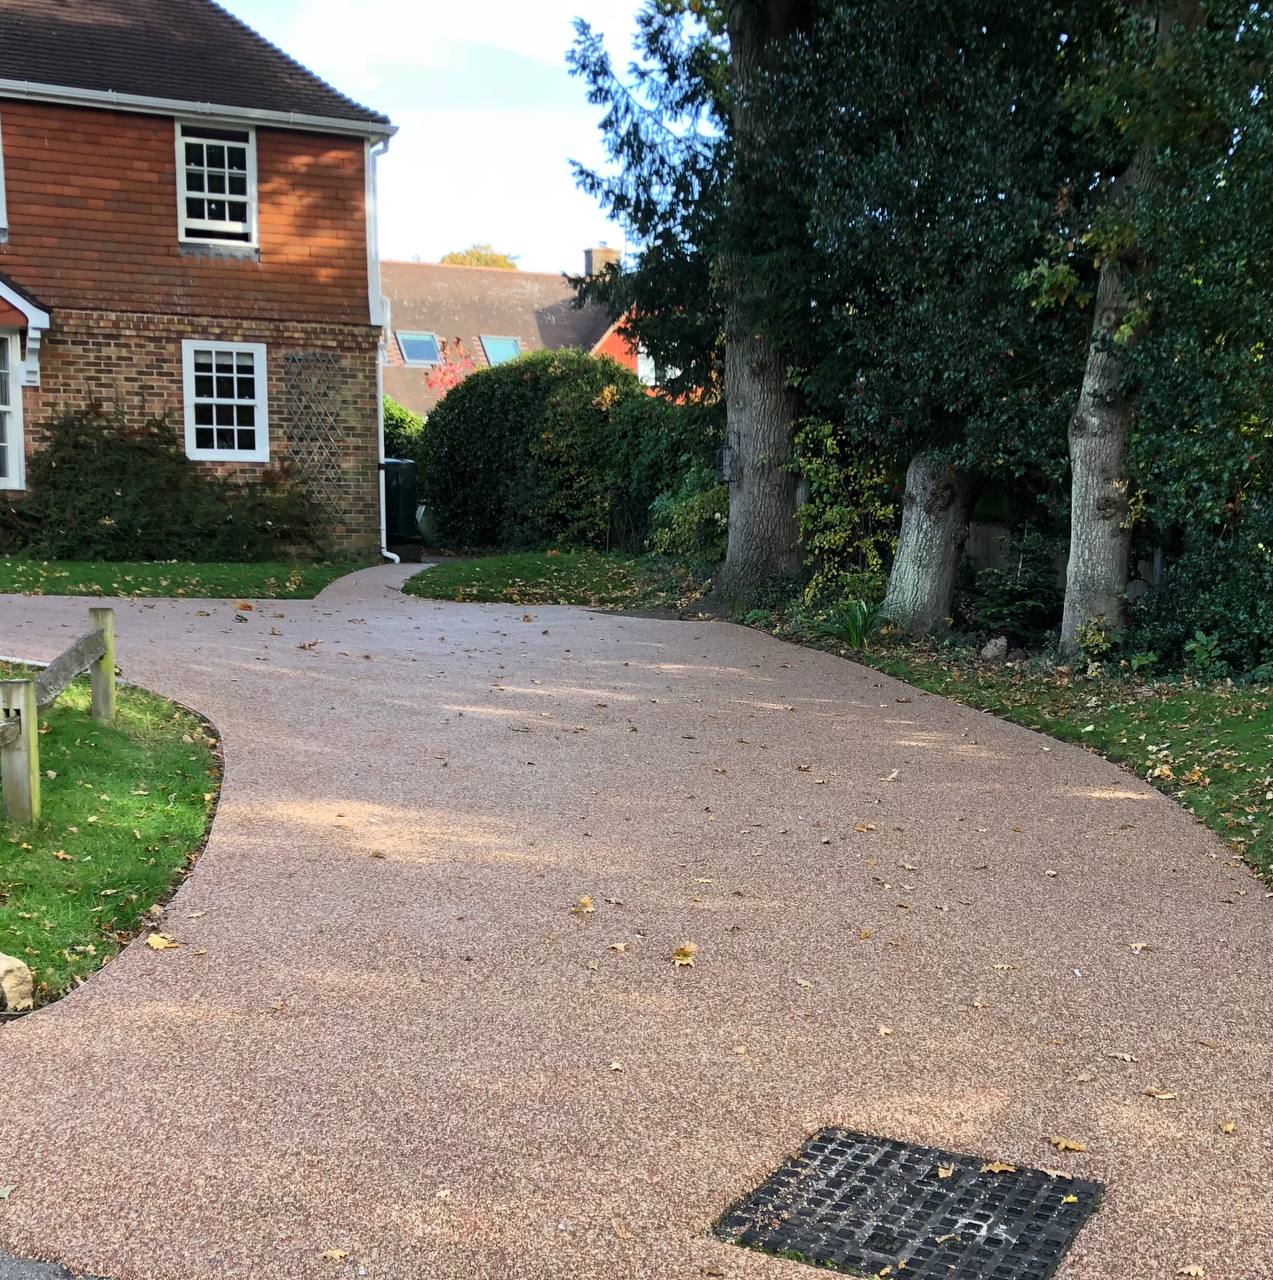 This is a photo of a Resin bound driveway carried out in a district of Bury. All works done by Resin Driveways Bury